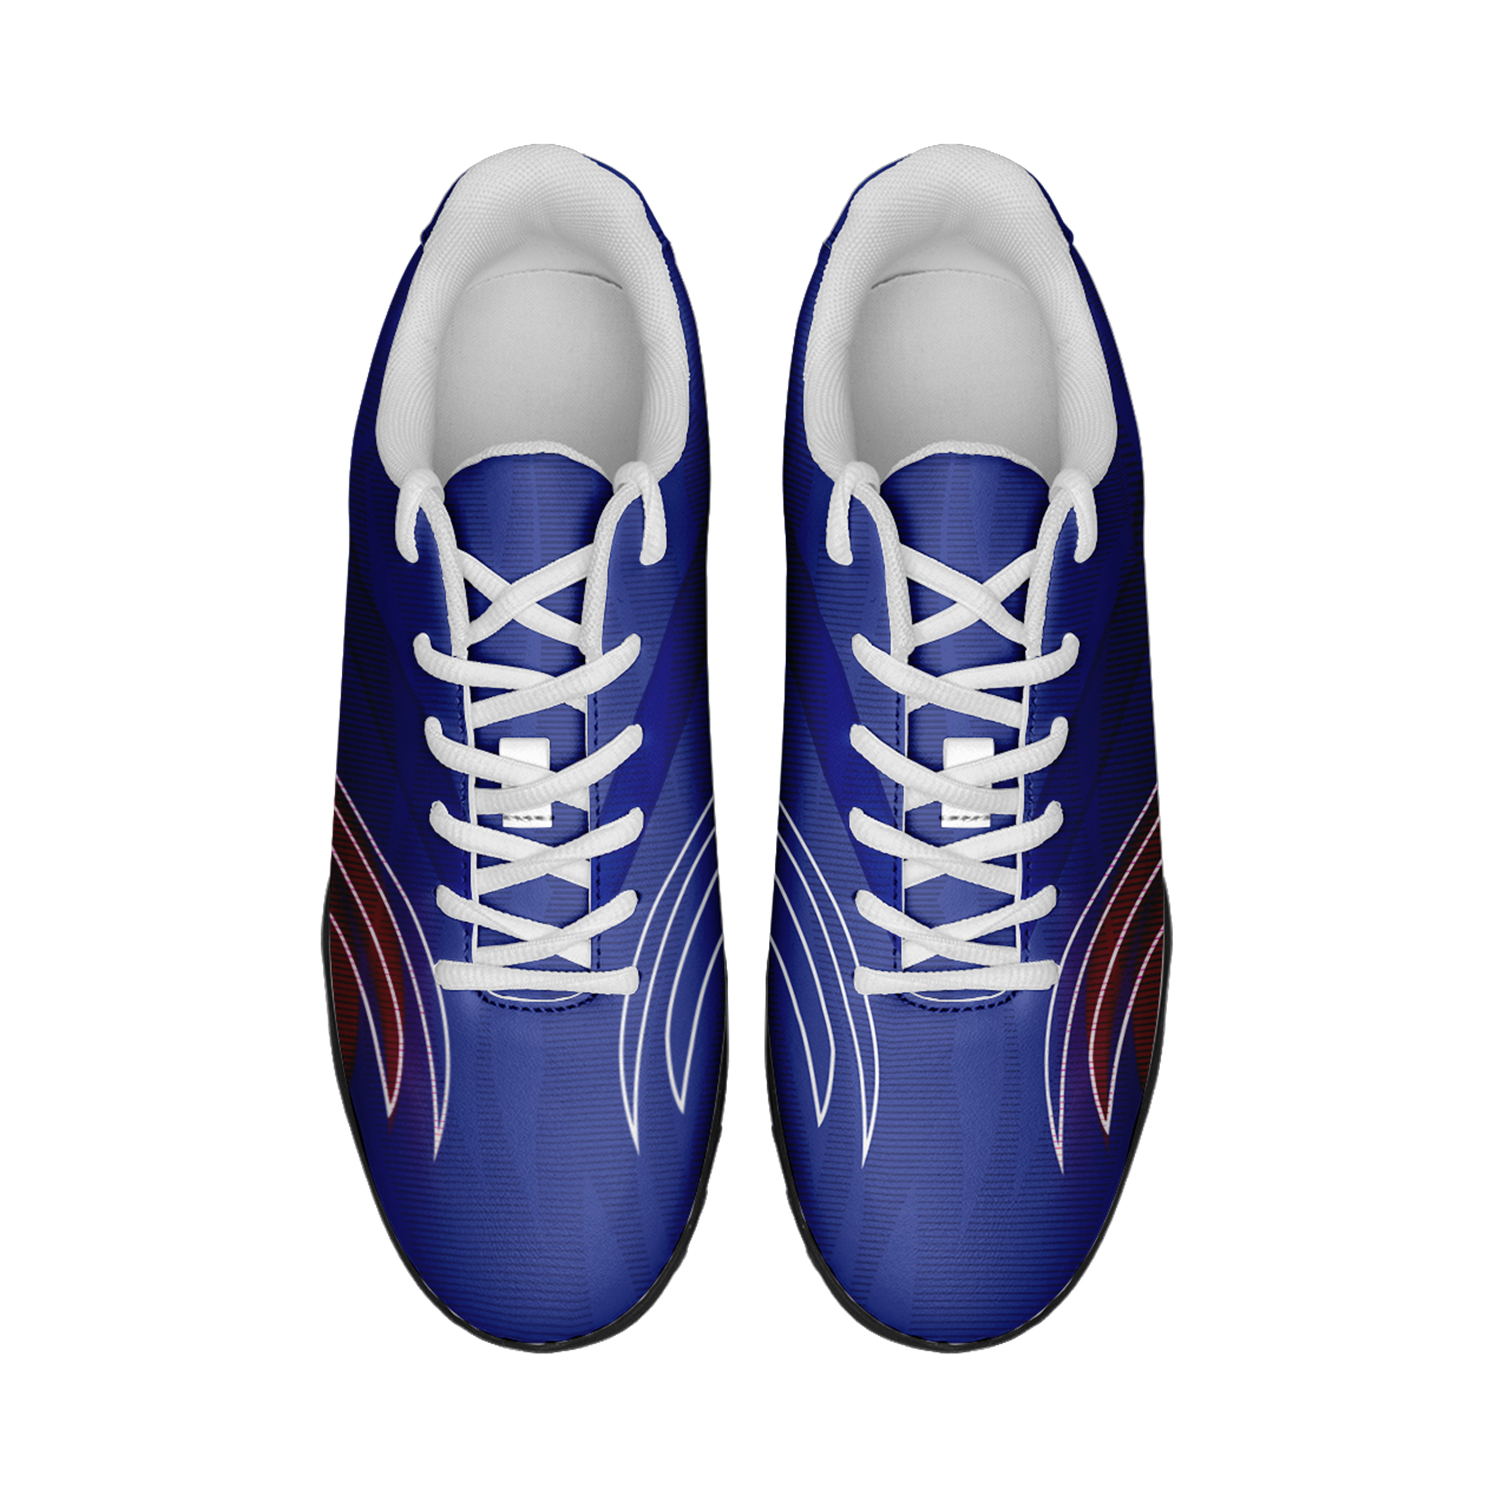 Custom Japan Team Soccer Shoes Personalized Design Printing POD Football Boots